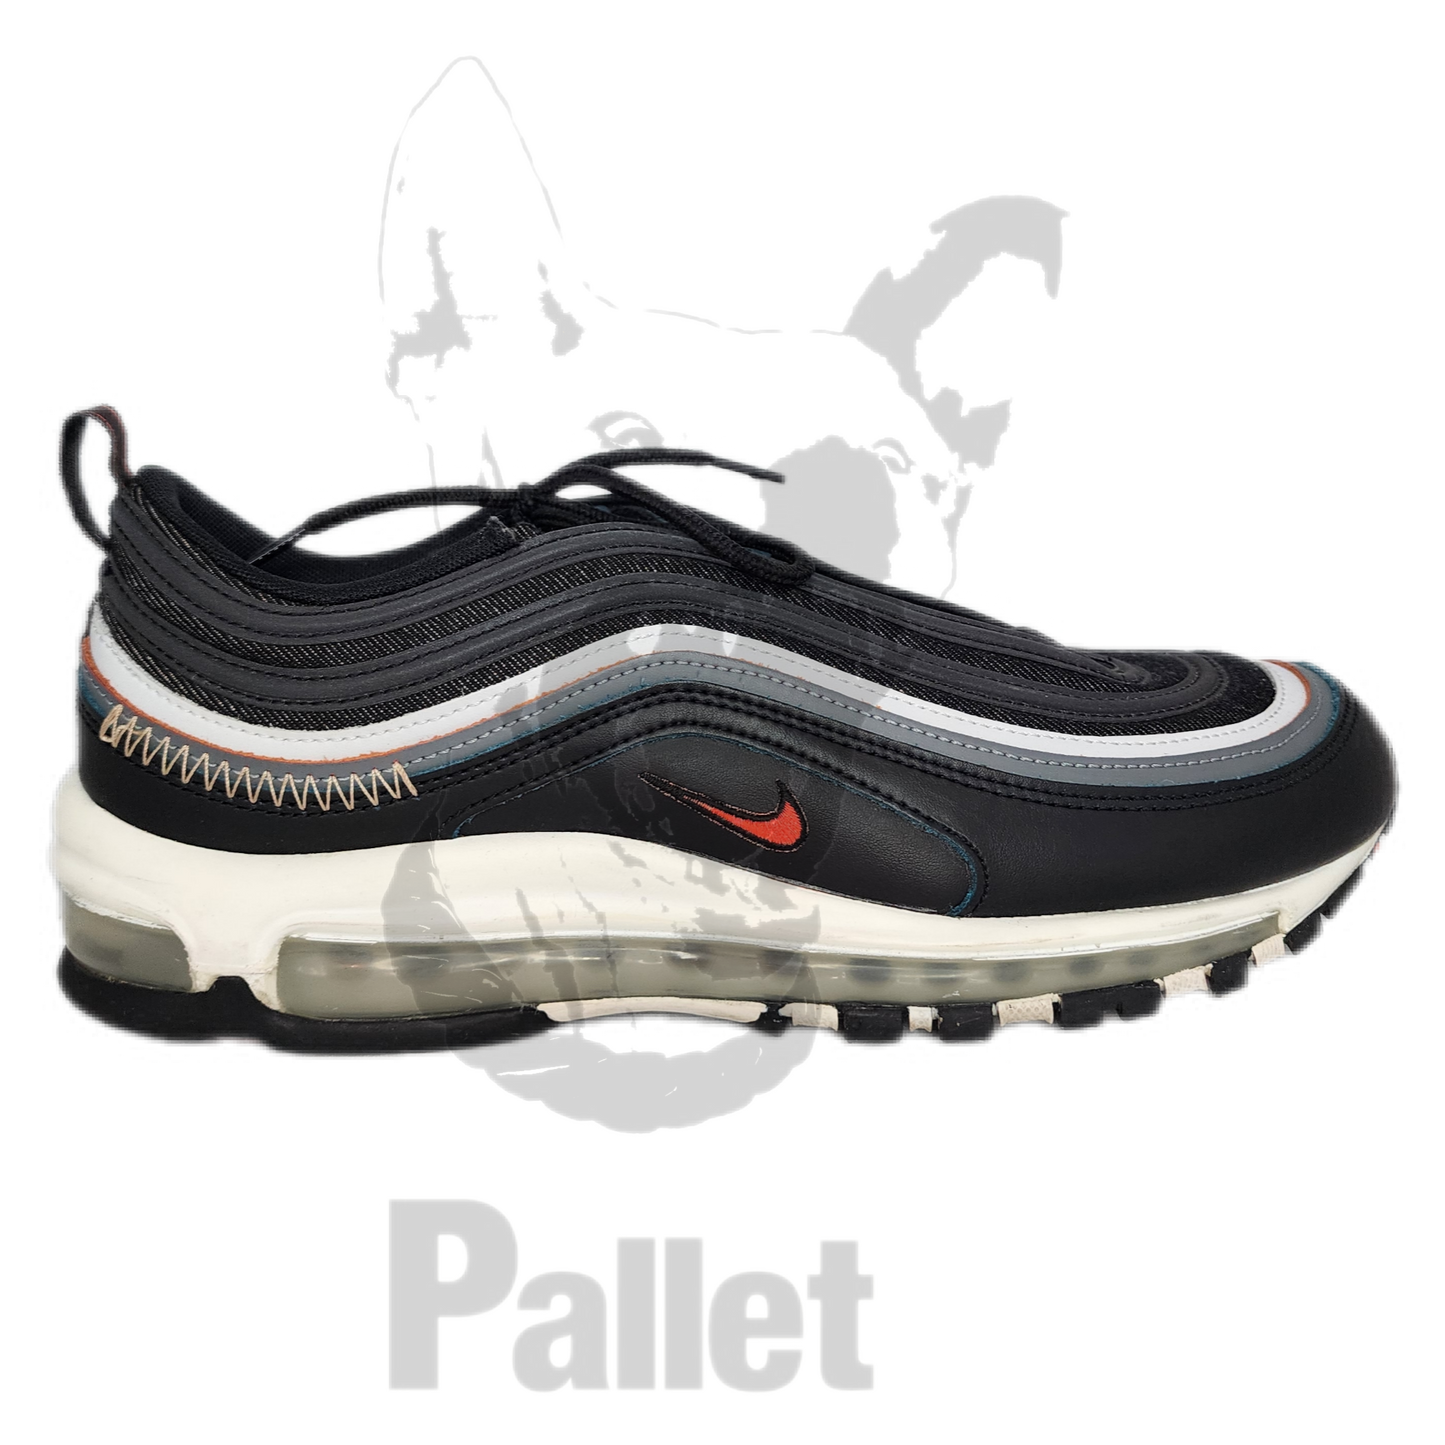 Nike - "Air Max 97 Alter & Revel" -Size 11